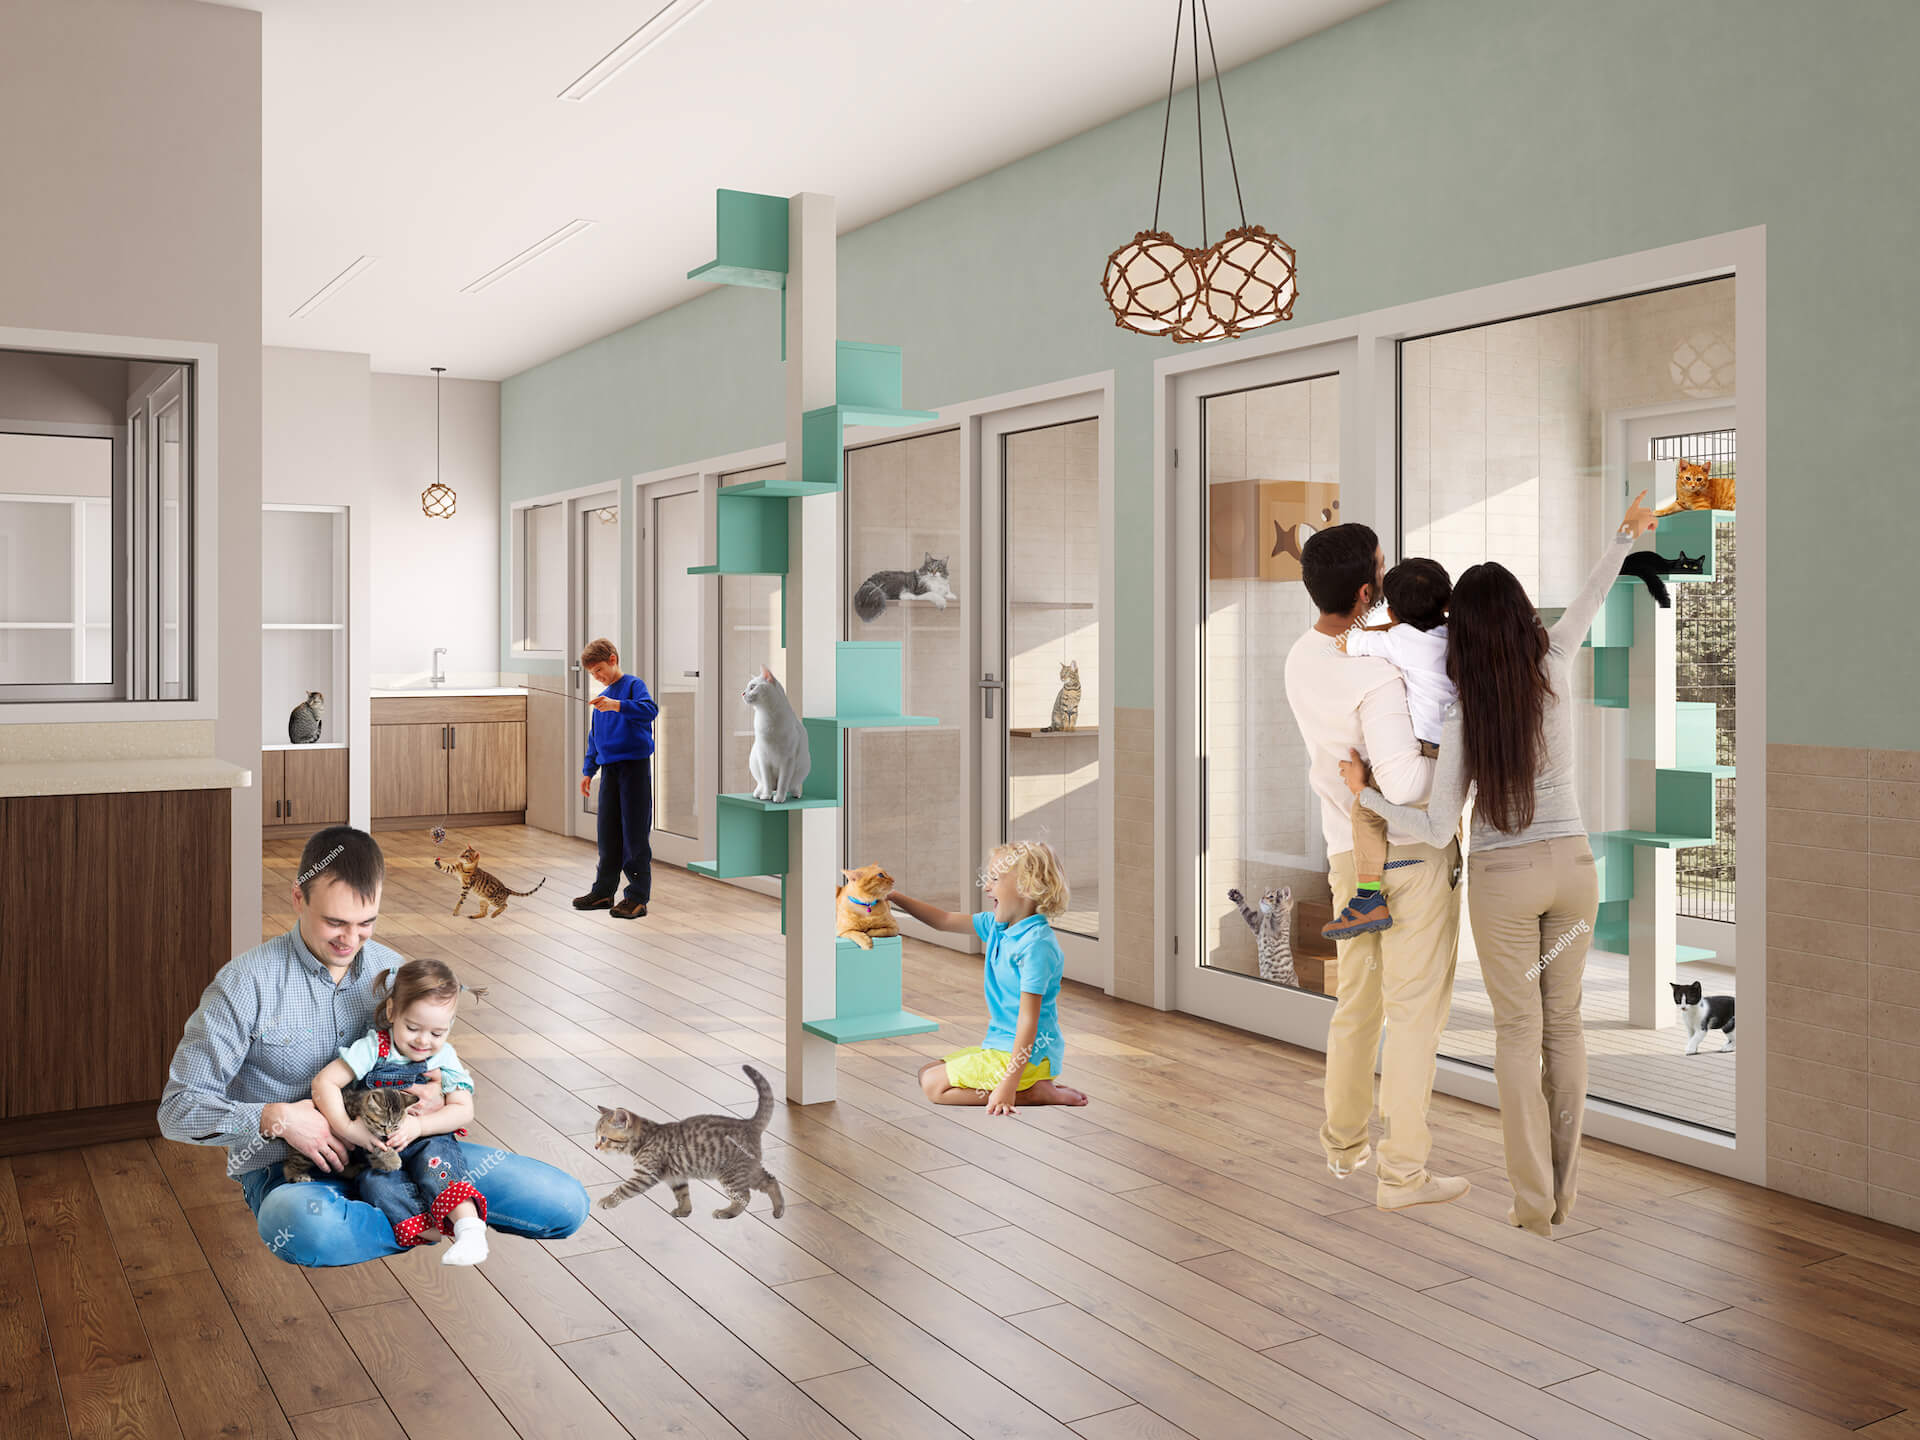 First Draft of Cat Shelter Rendering with Photoshopped People and Cats